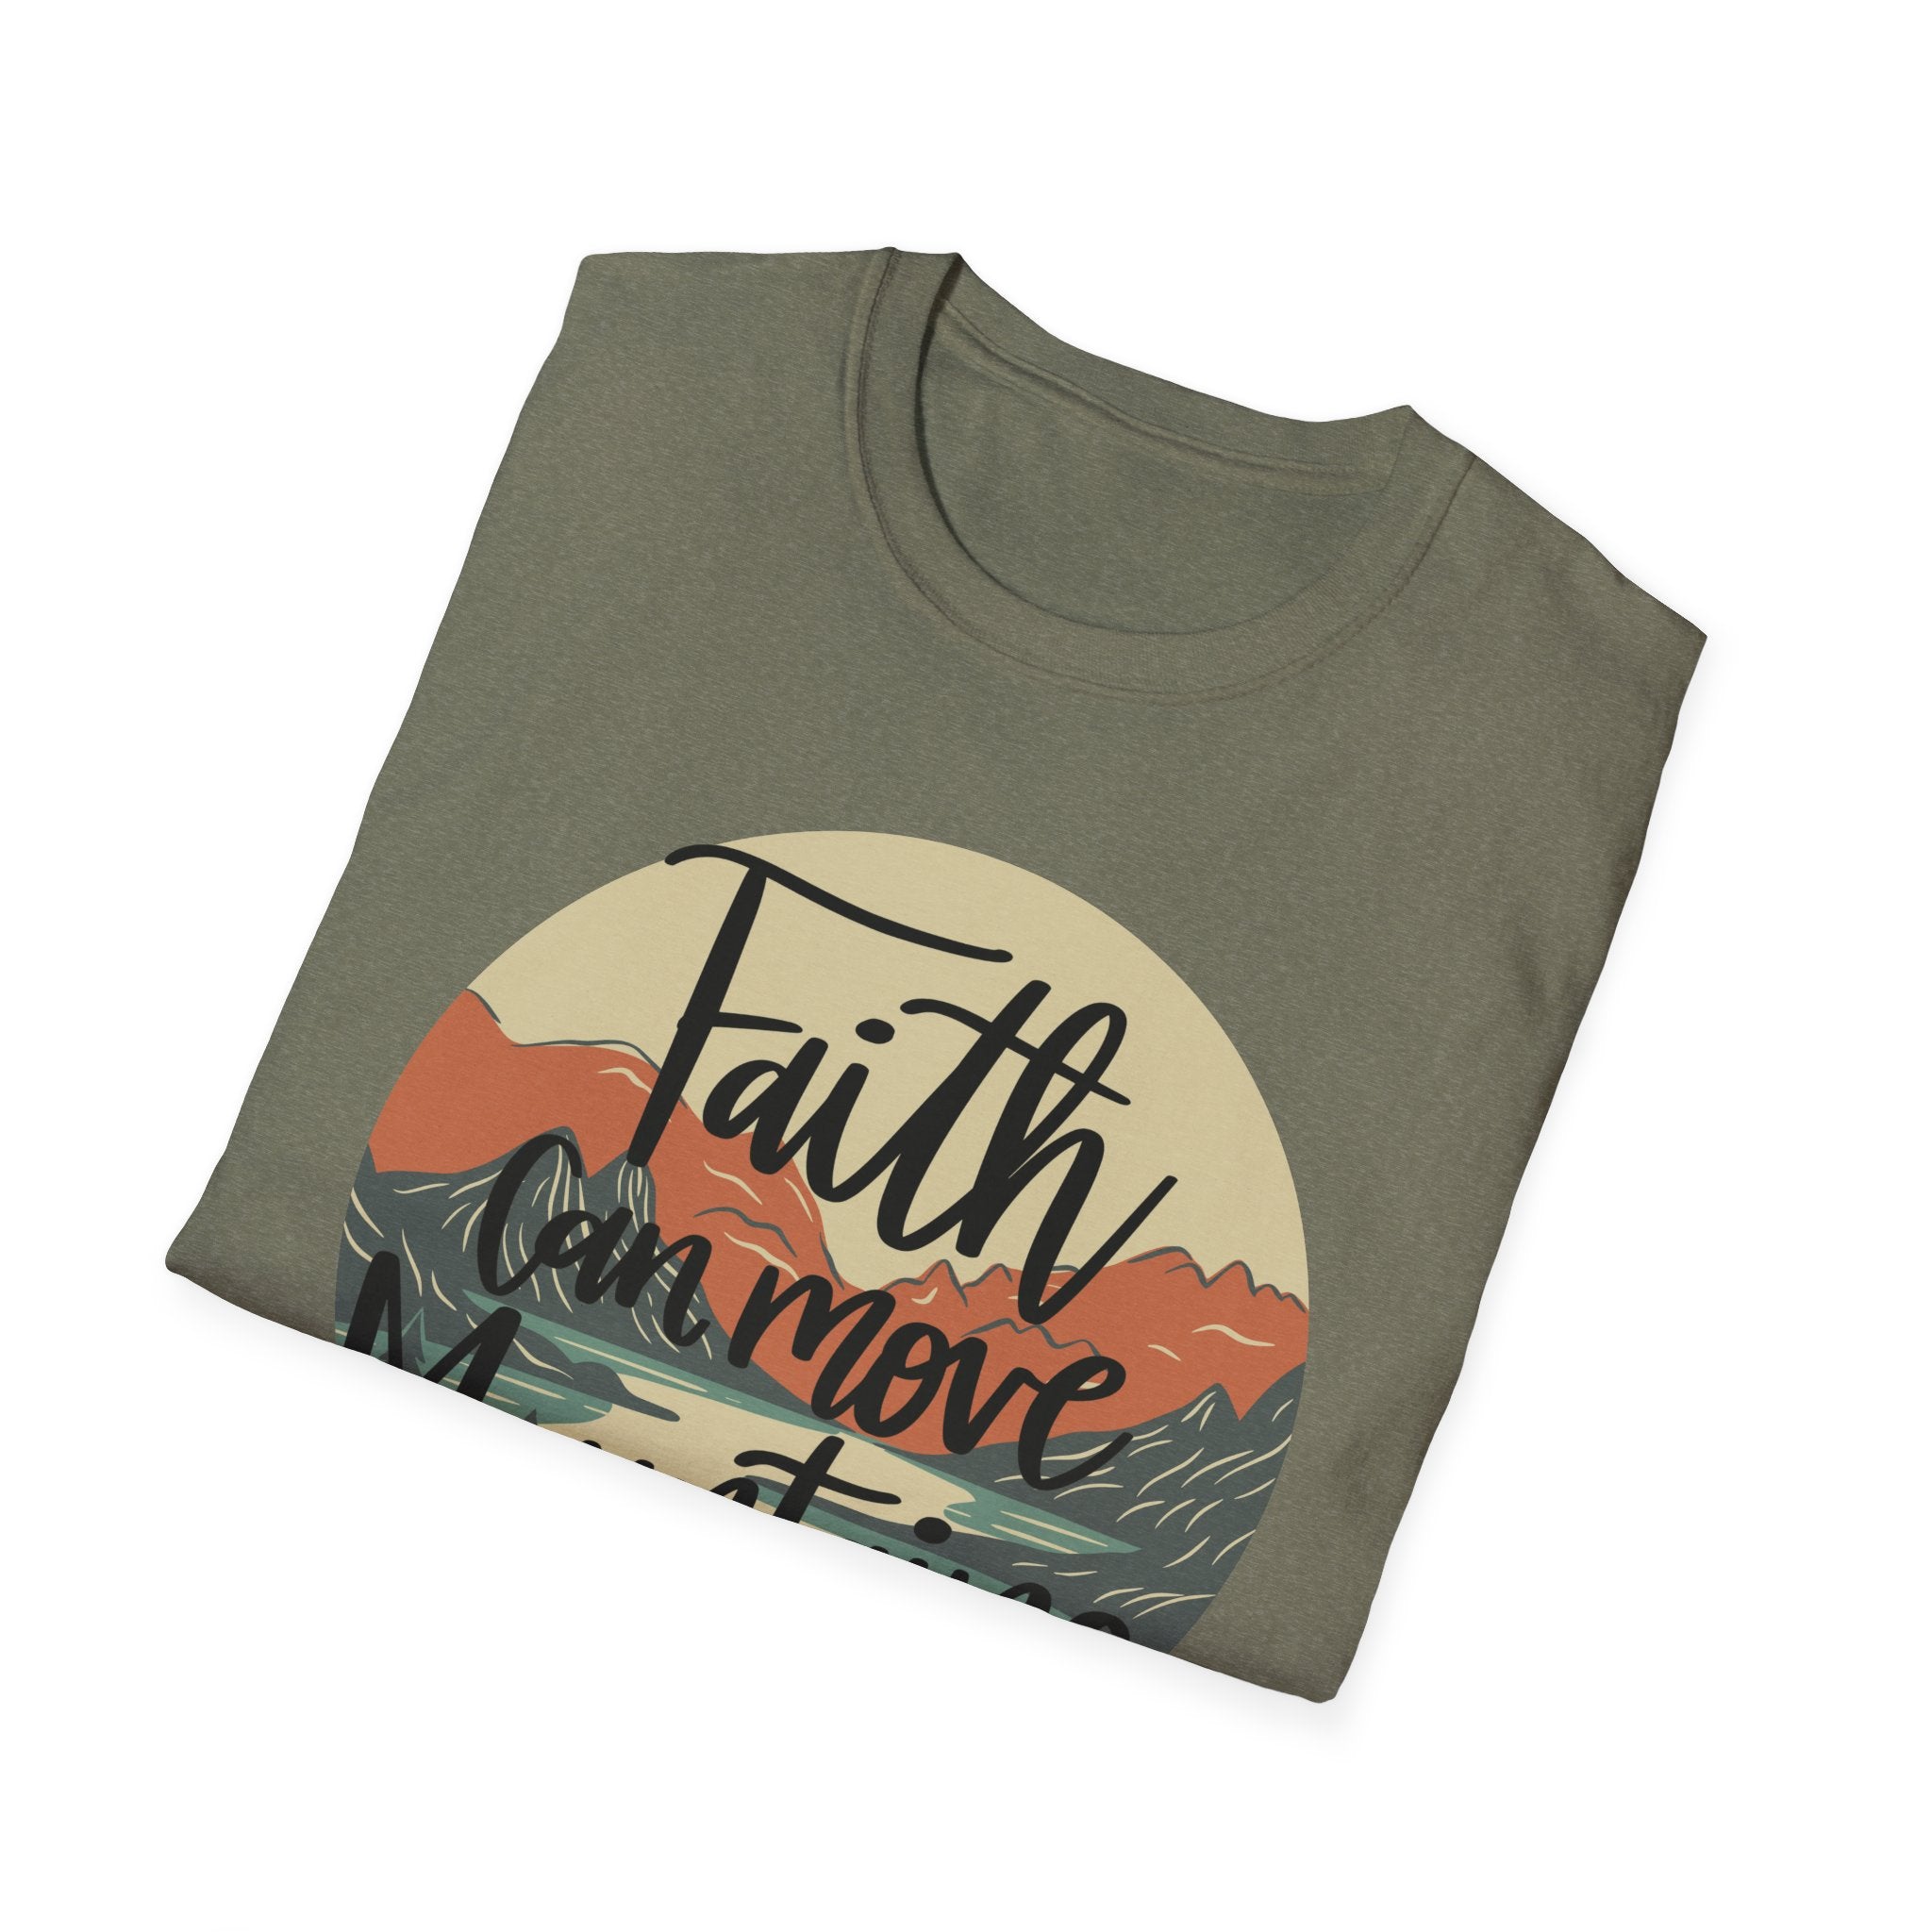 Moving Mountain with Faith  Softstyle T-Shirt